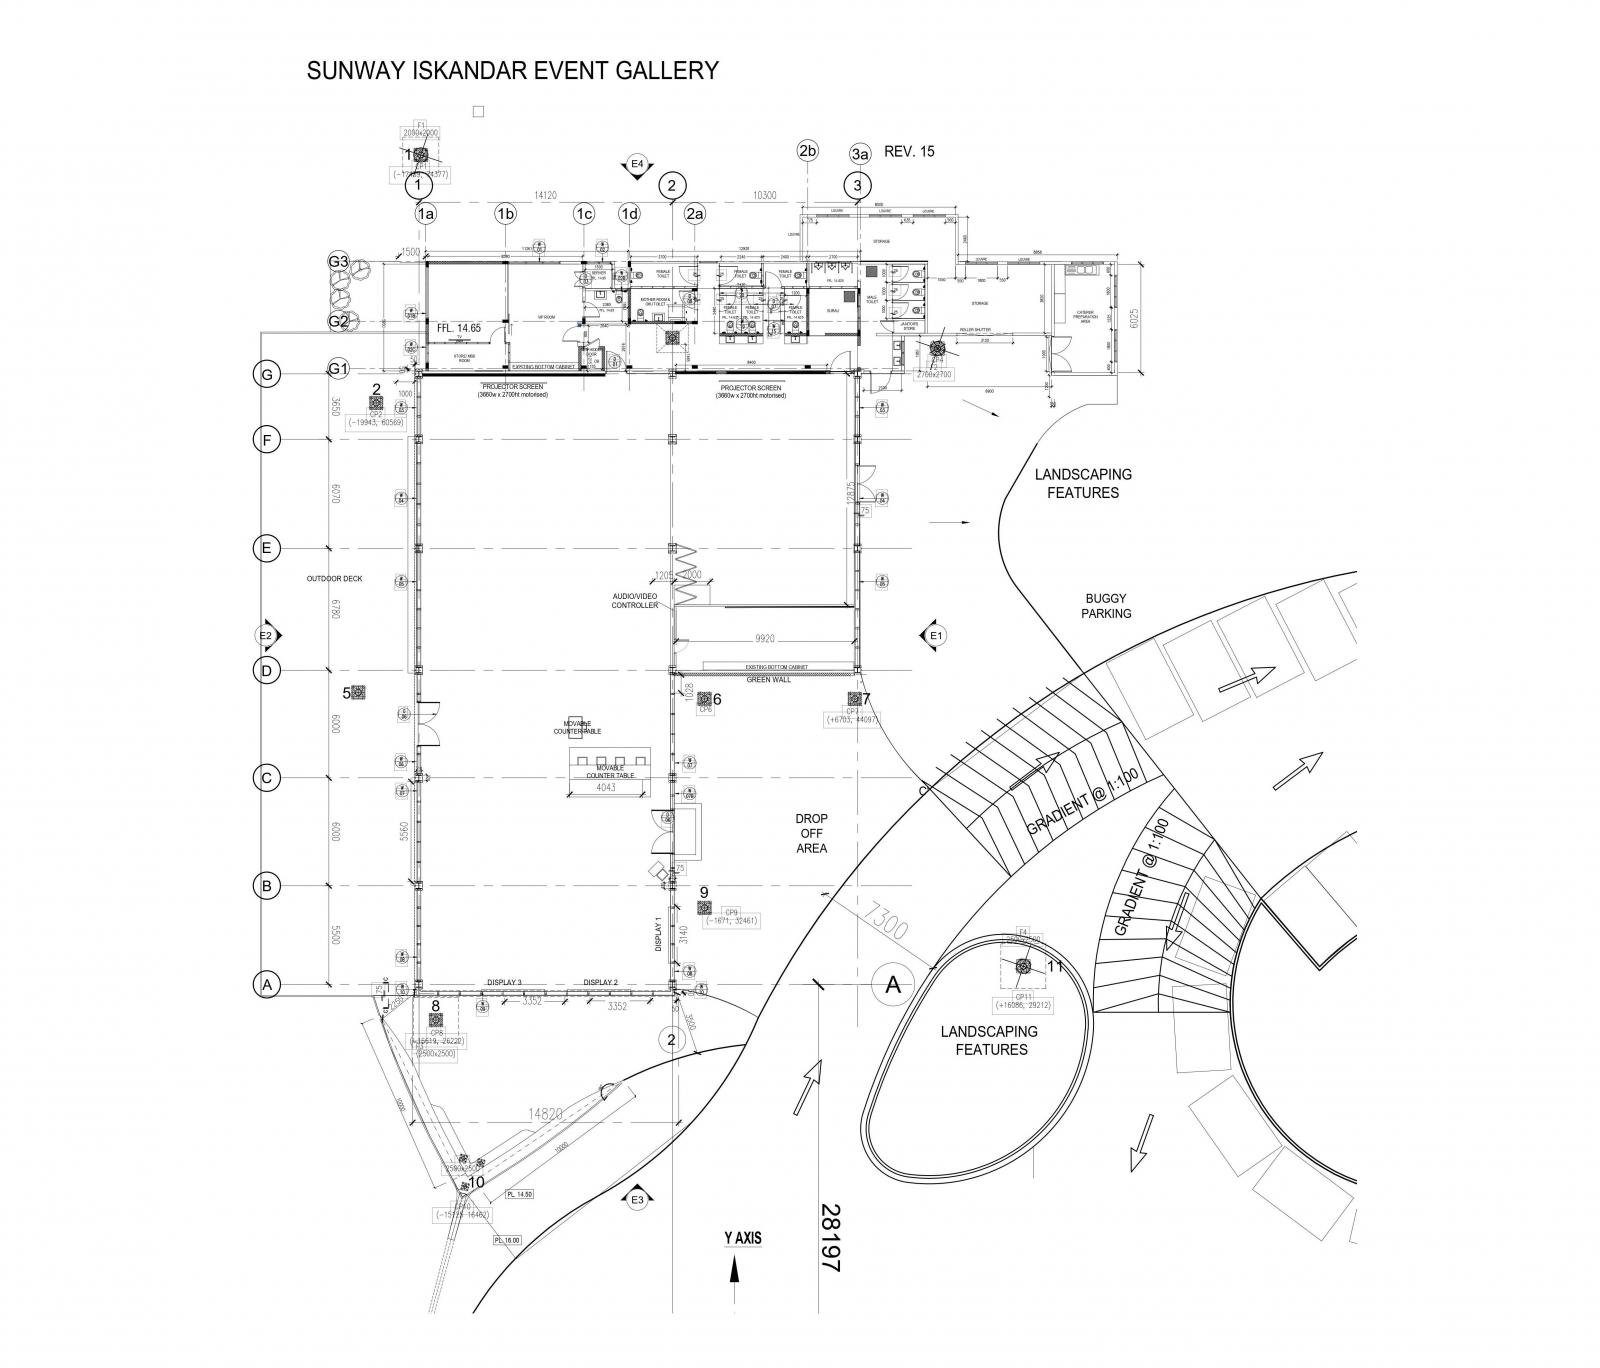 Events Gallery - Site Plan